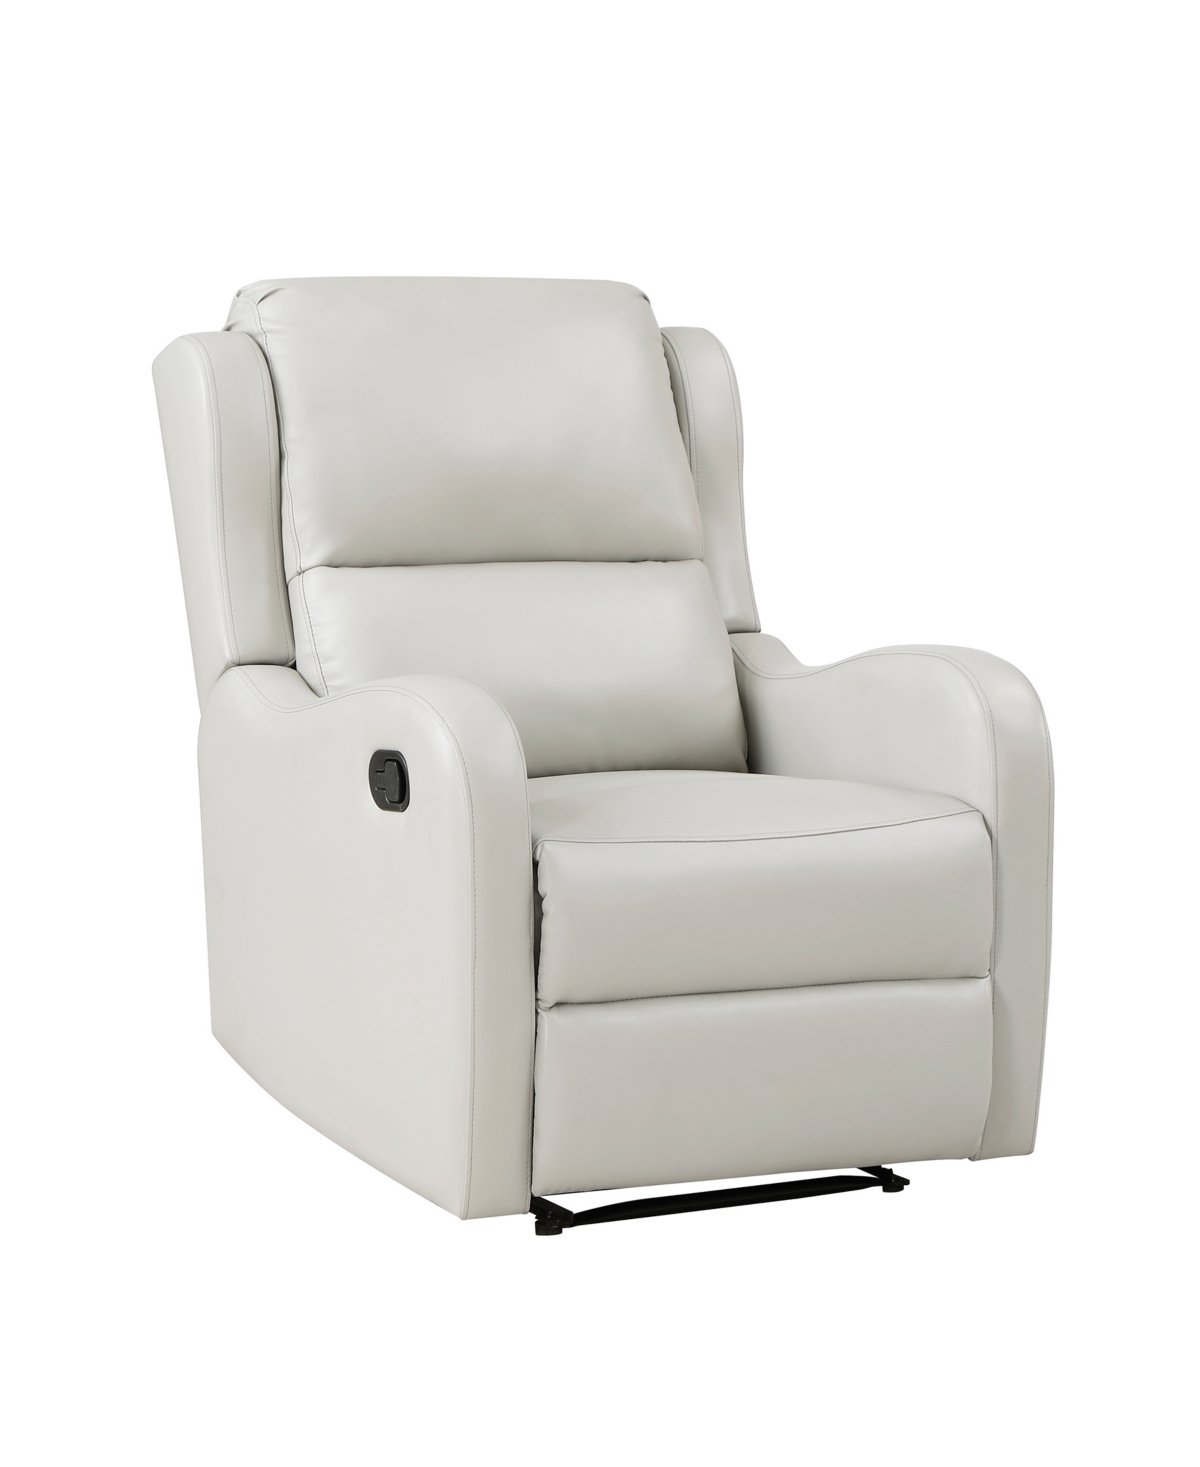 Homelegance White Label Cynthia 30" Manual Recliner In Beige